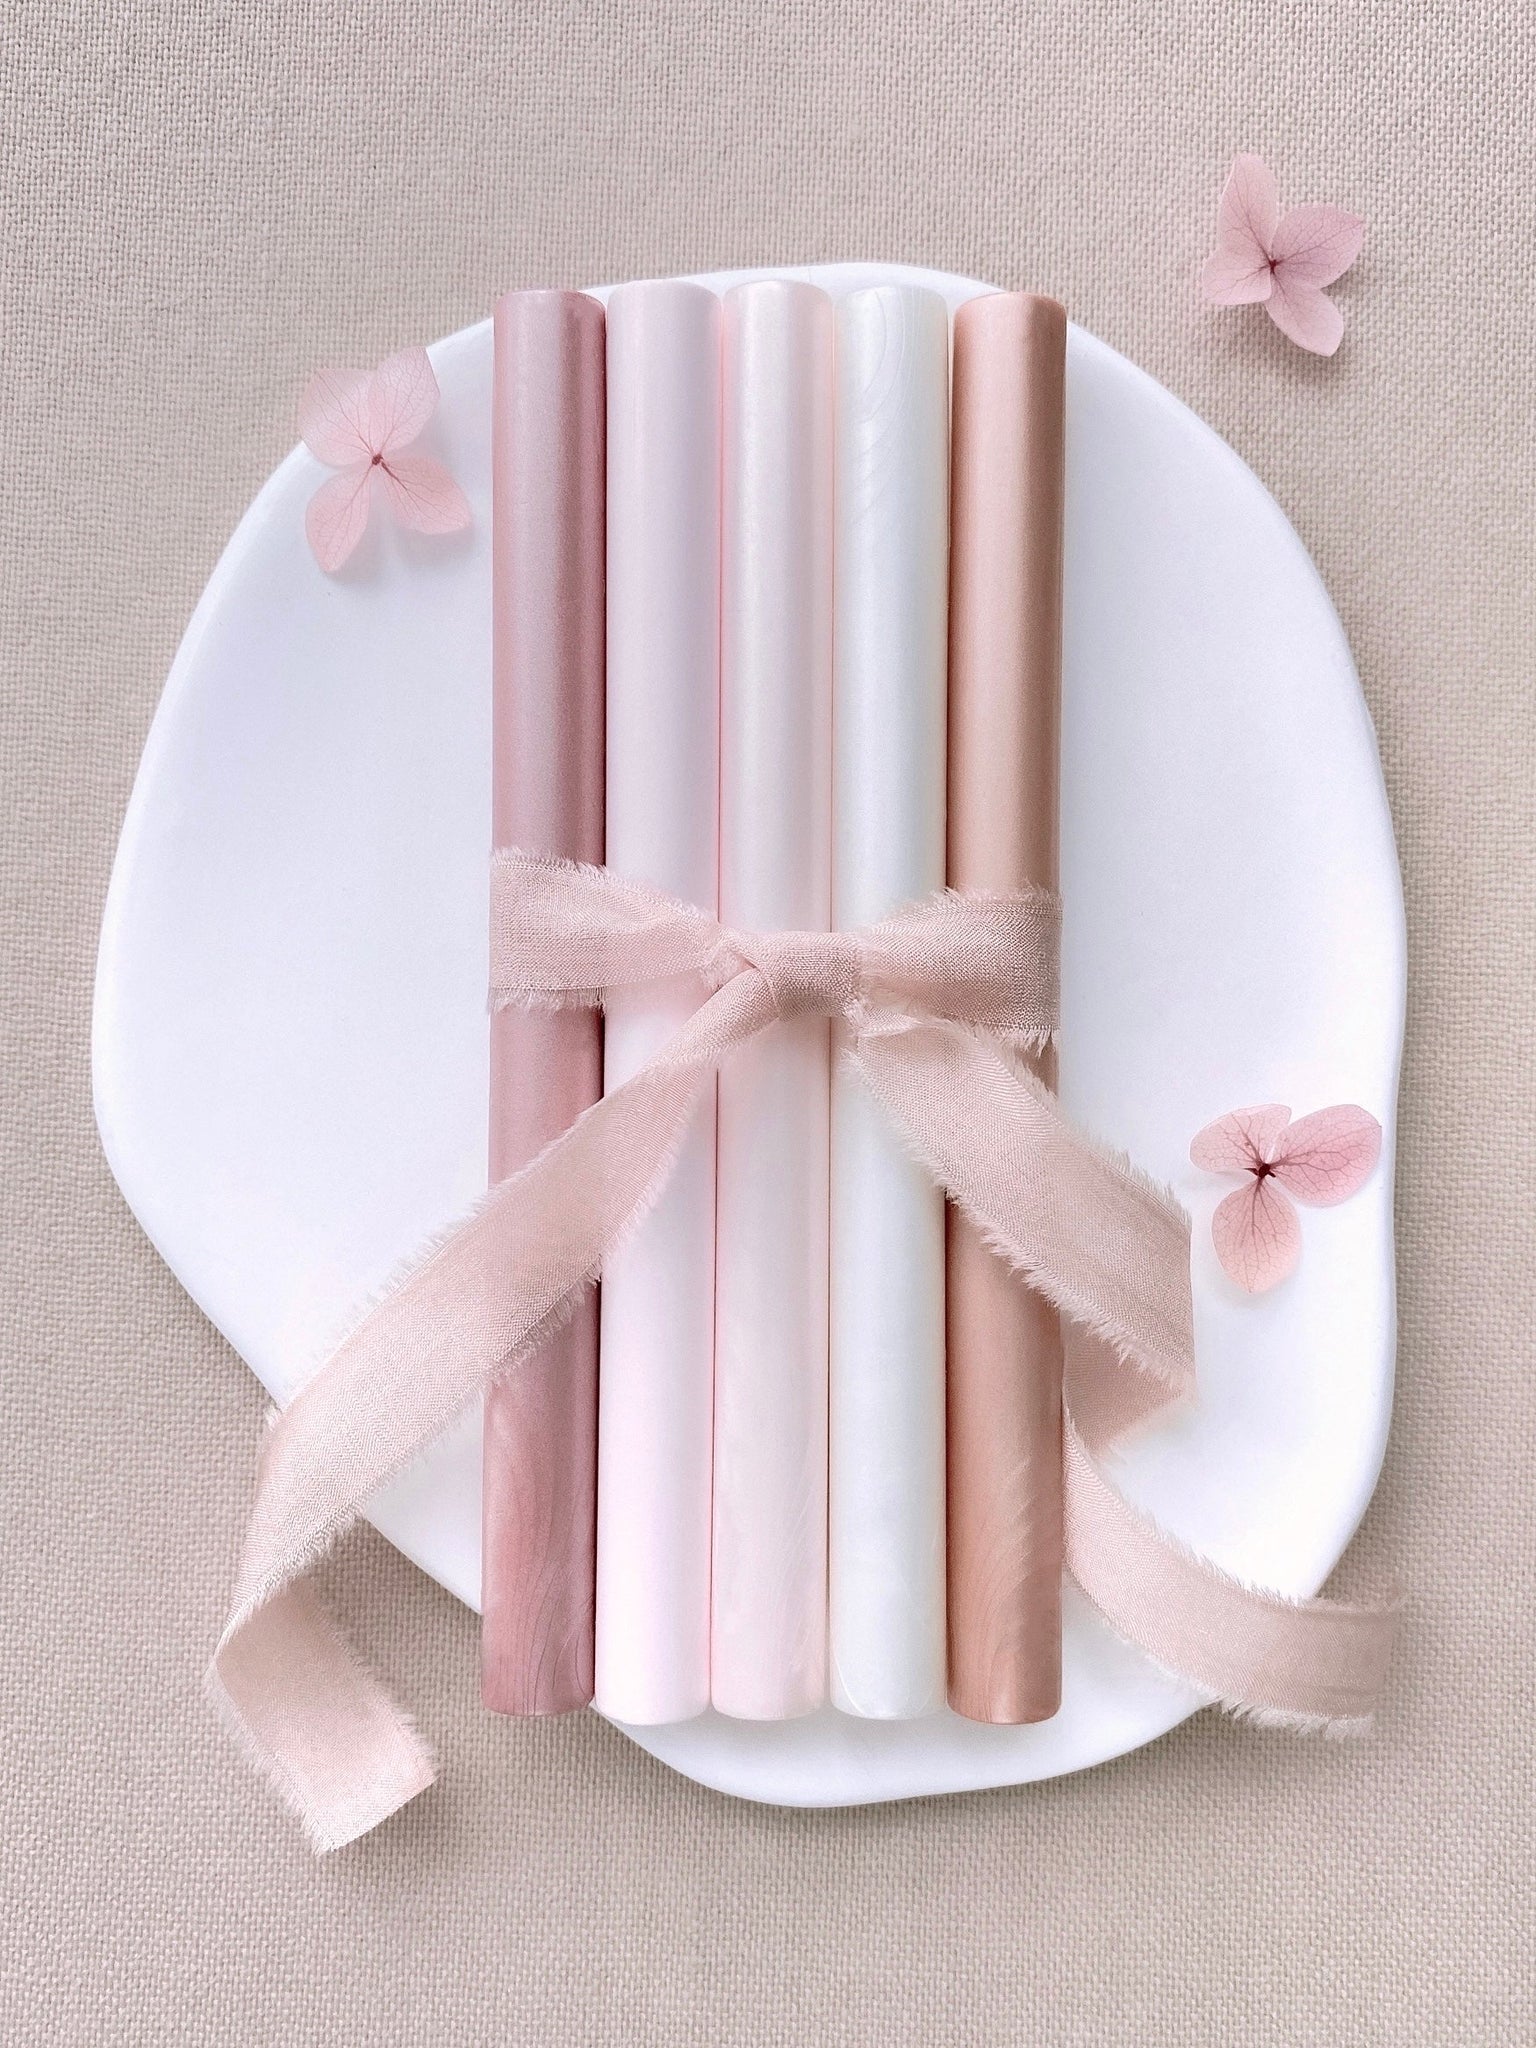 a set of 5 blush tones sealing wax sticks in rose gold, light blush, nude pearl, white pearl, coral colors_front angle